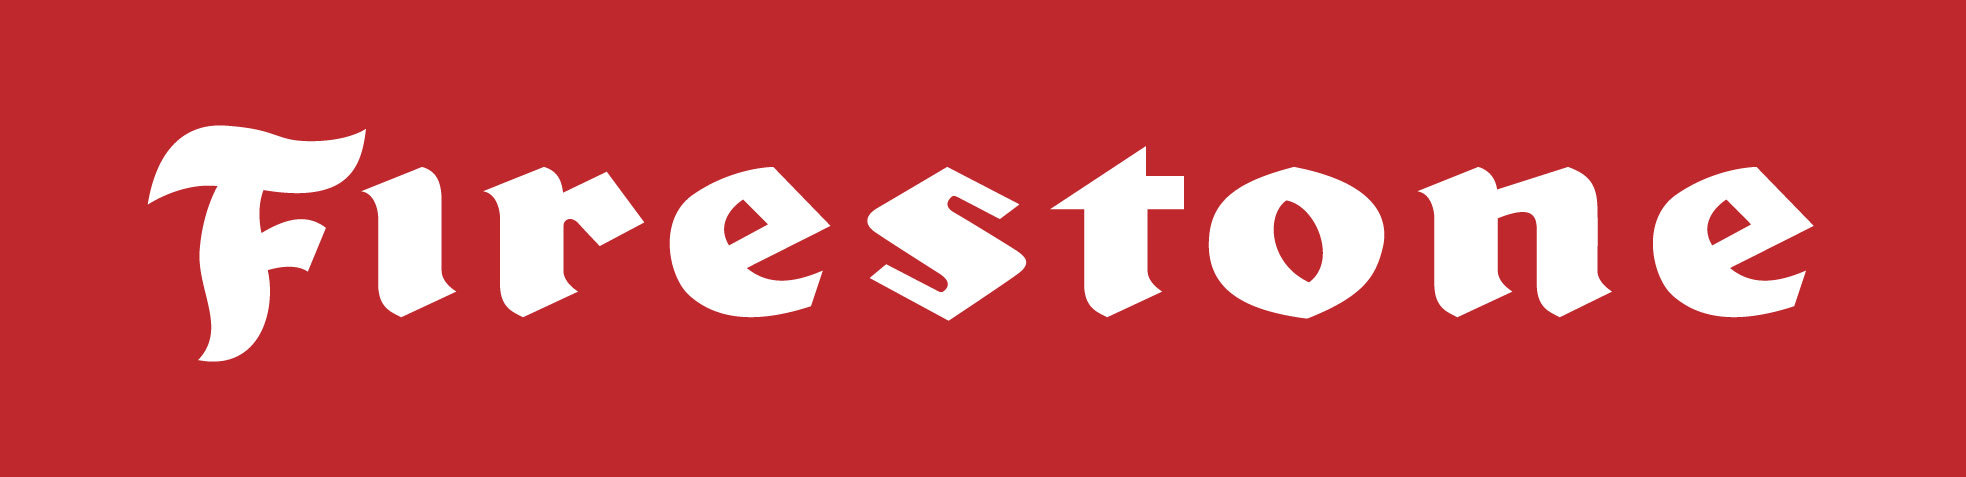 Firestone Logo   Fonts In Use - Firestone, Transparent background PNG HD thumbnail